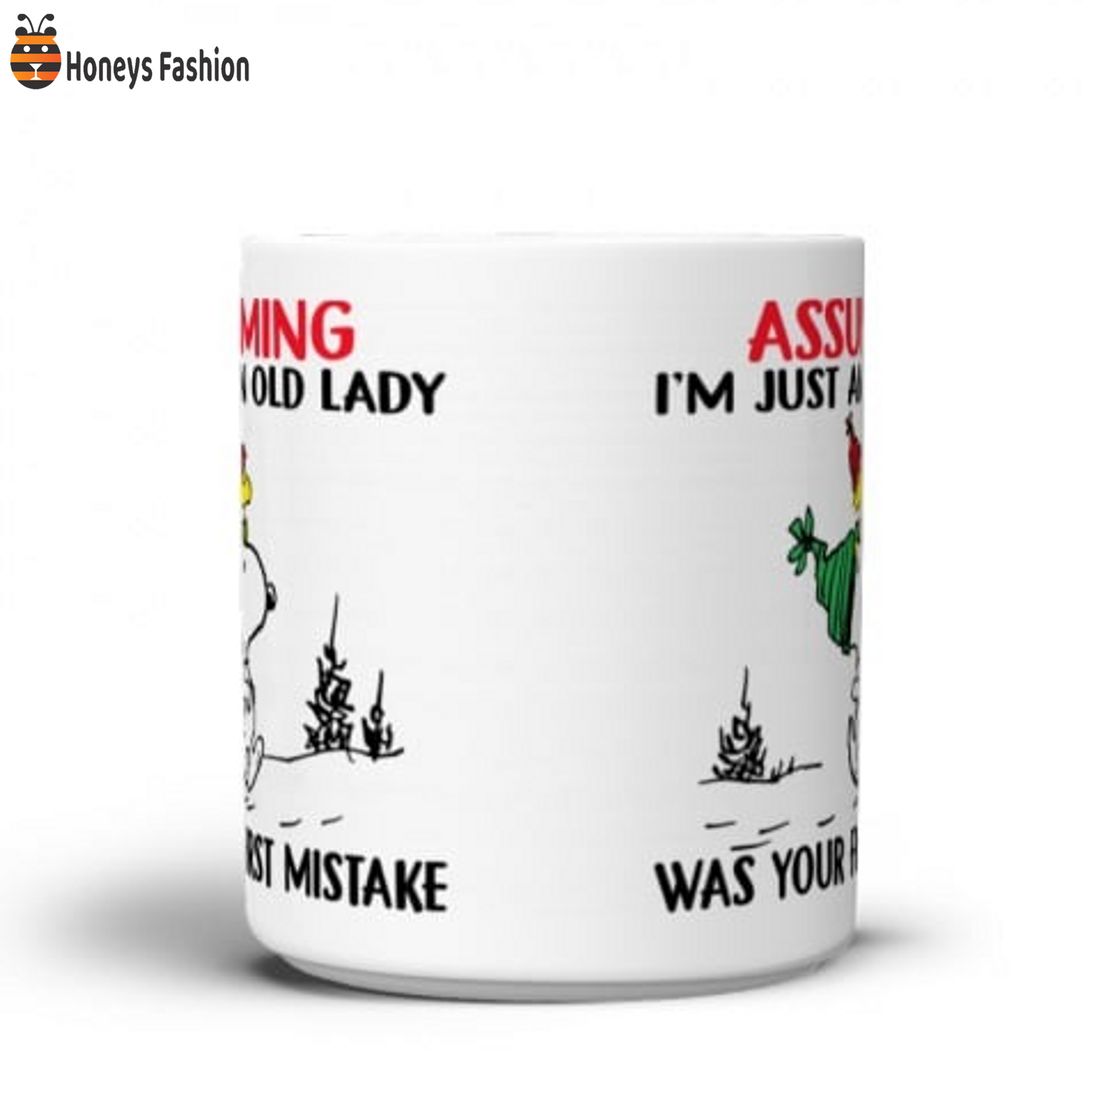 Snoopy assuming I’m just an old lady was your first mistake mug